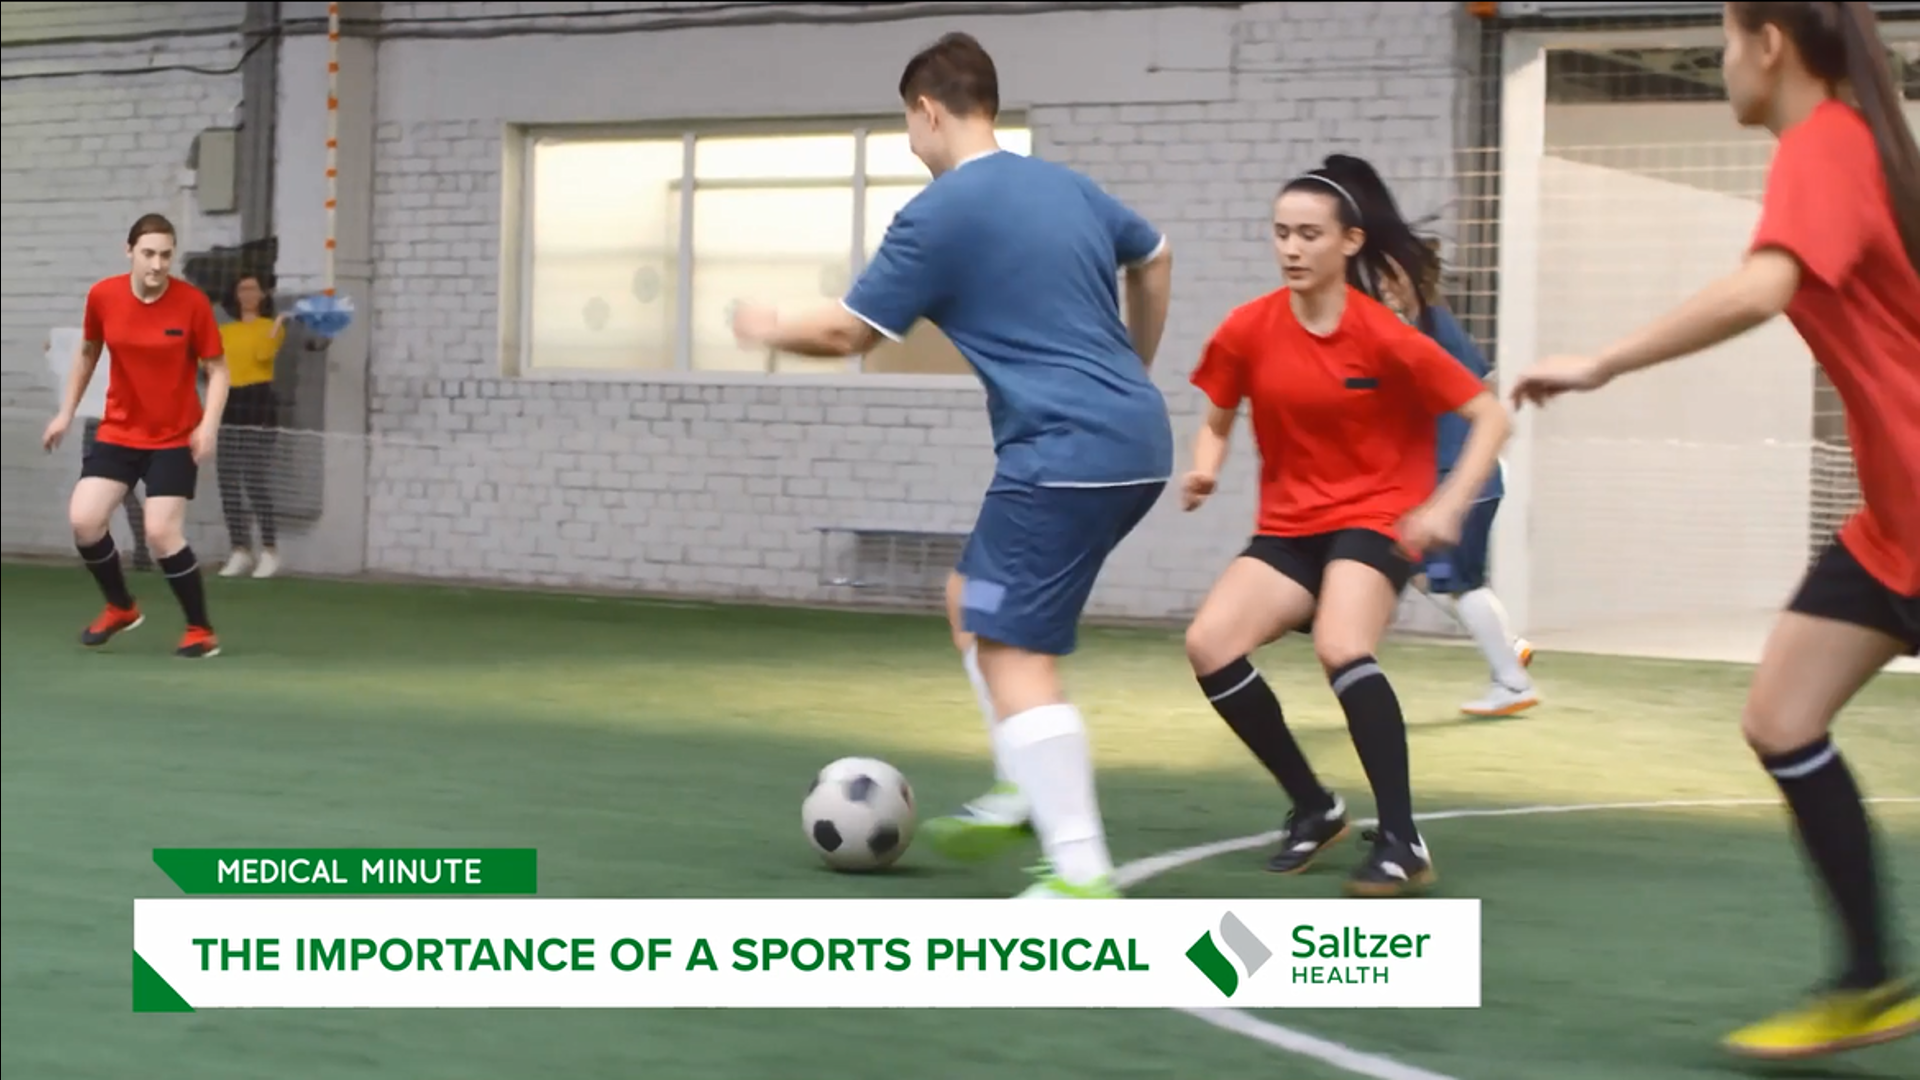 Jonathan Subaitani, PA with Saltzer Health explains what a sports physical is and the importance of getting one before starting sports.